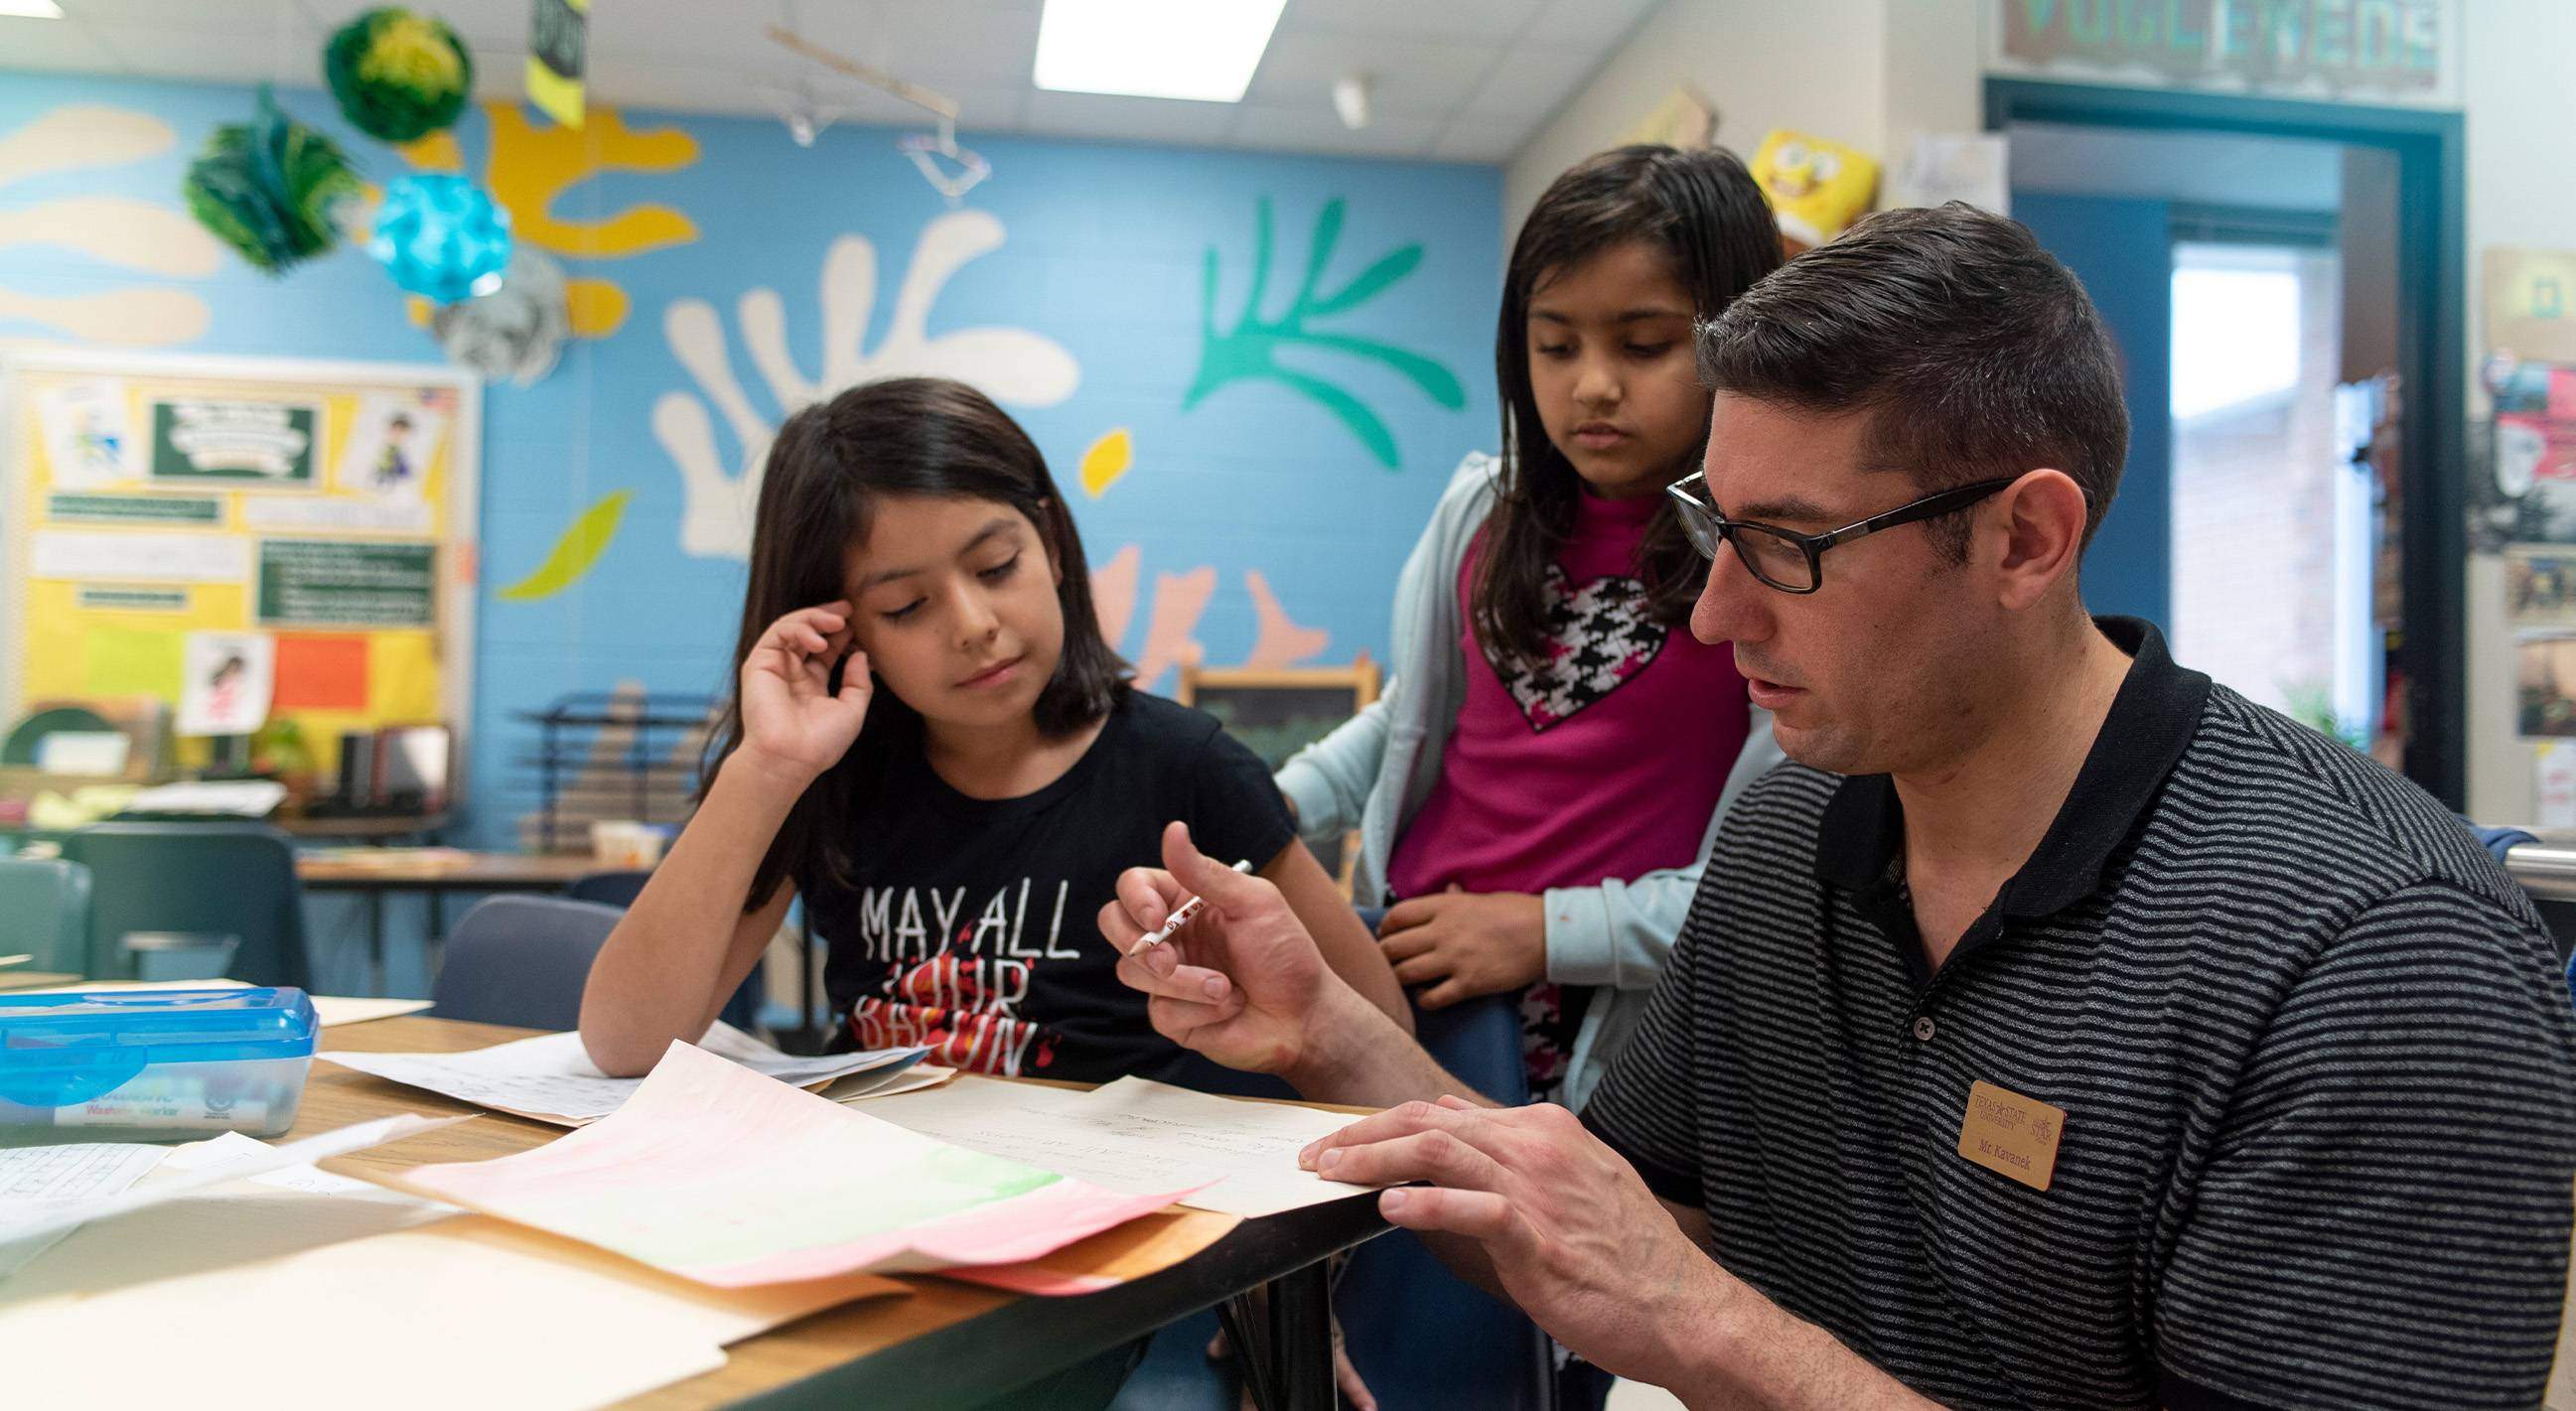 male teacher working with two young girls